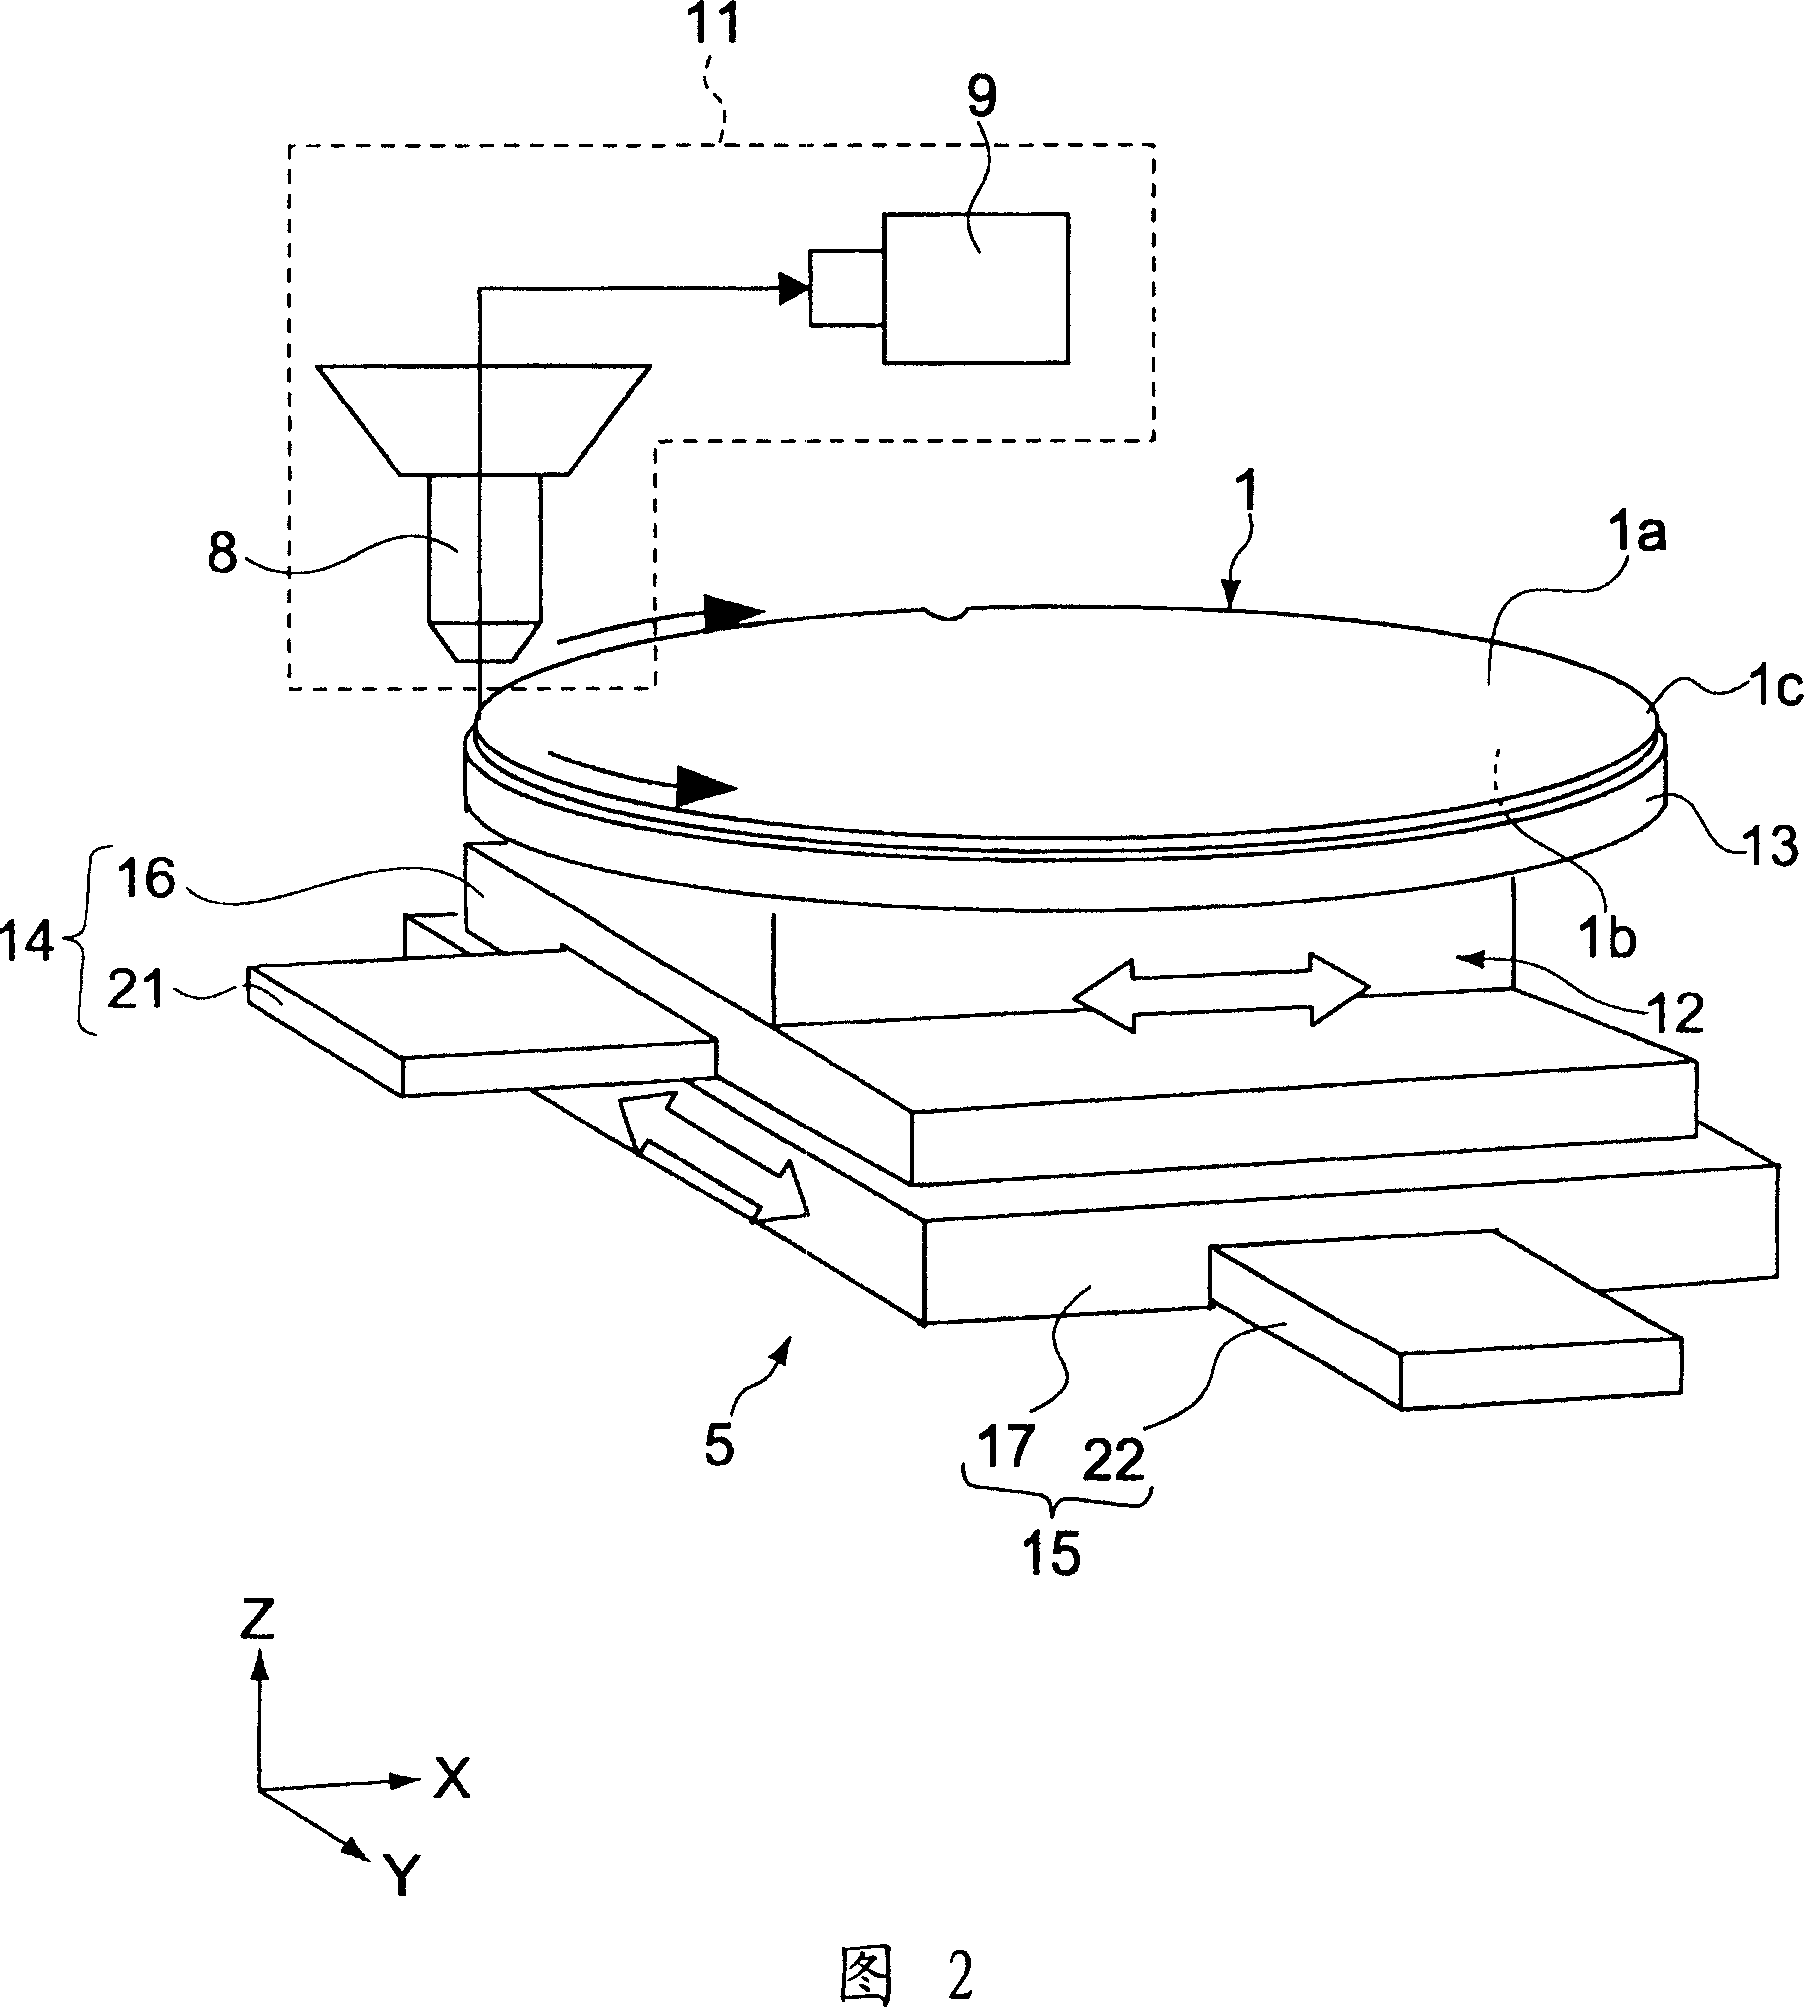 Defects detection device and method